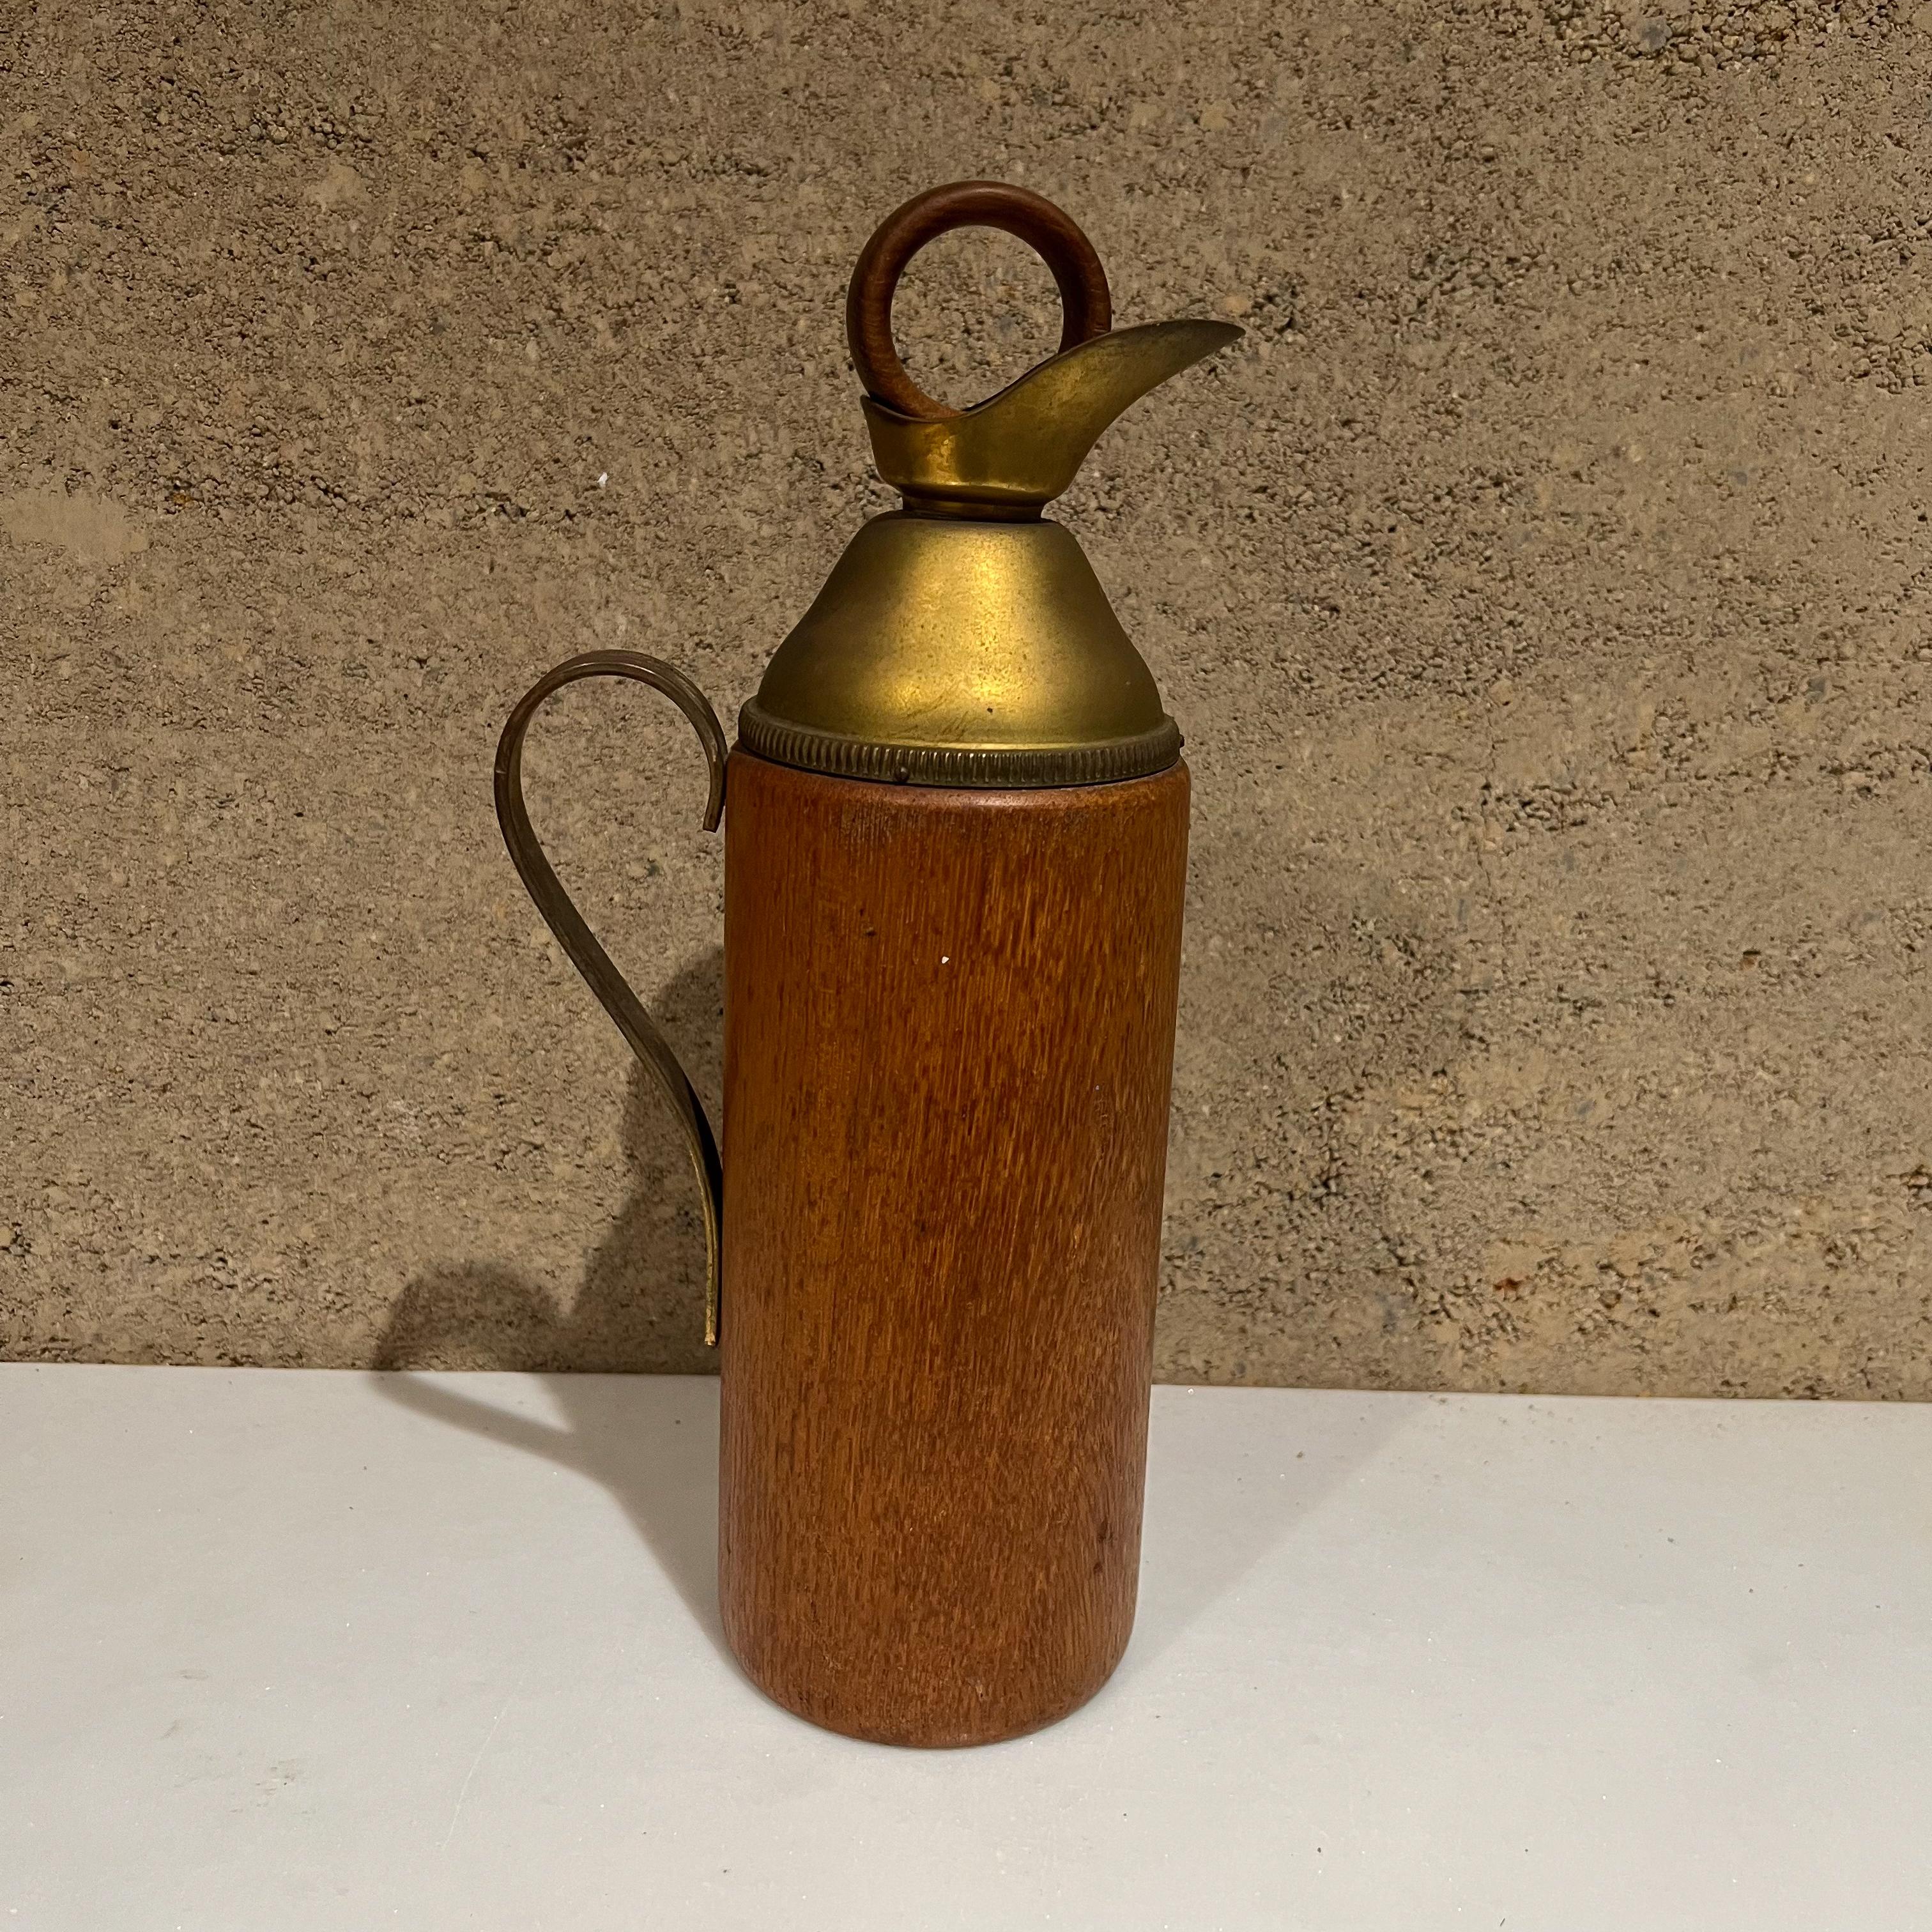 Aldo Tura Sculptural Carafe in Teakwood and Brass Italy, 1950s 4